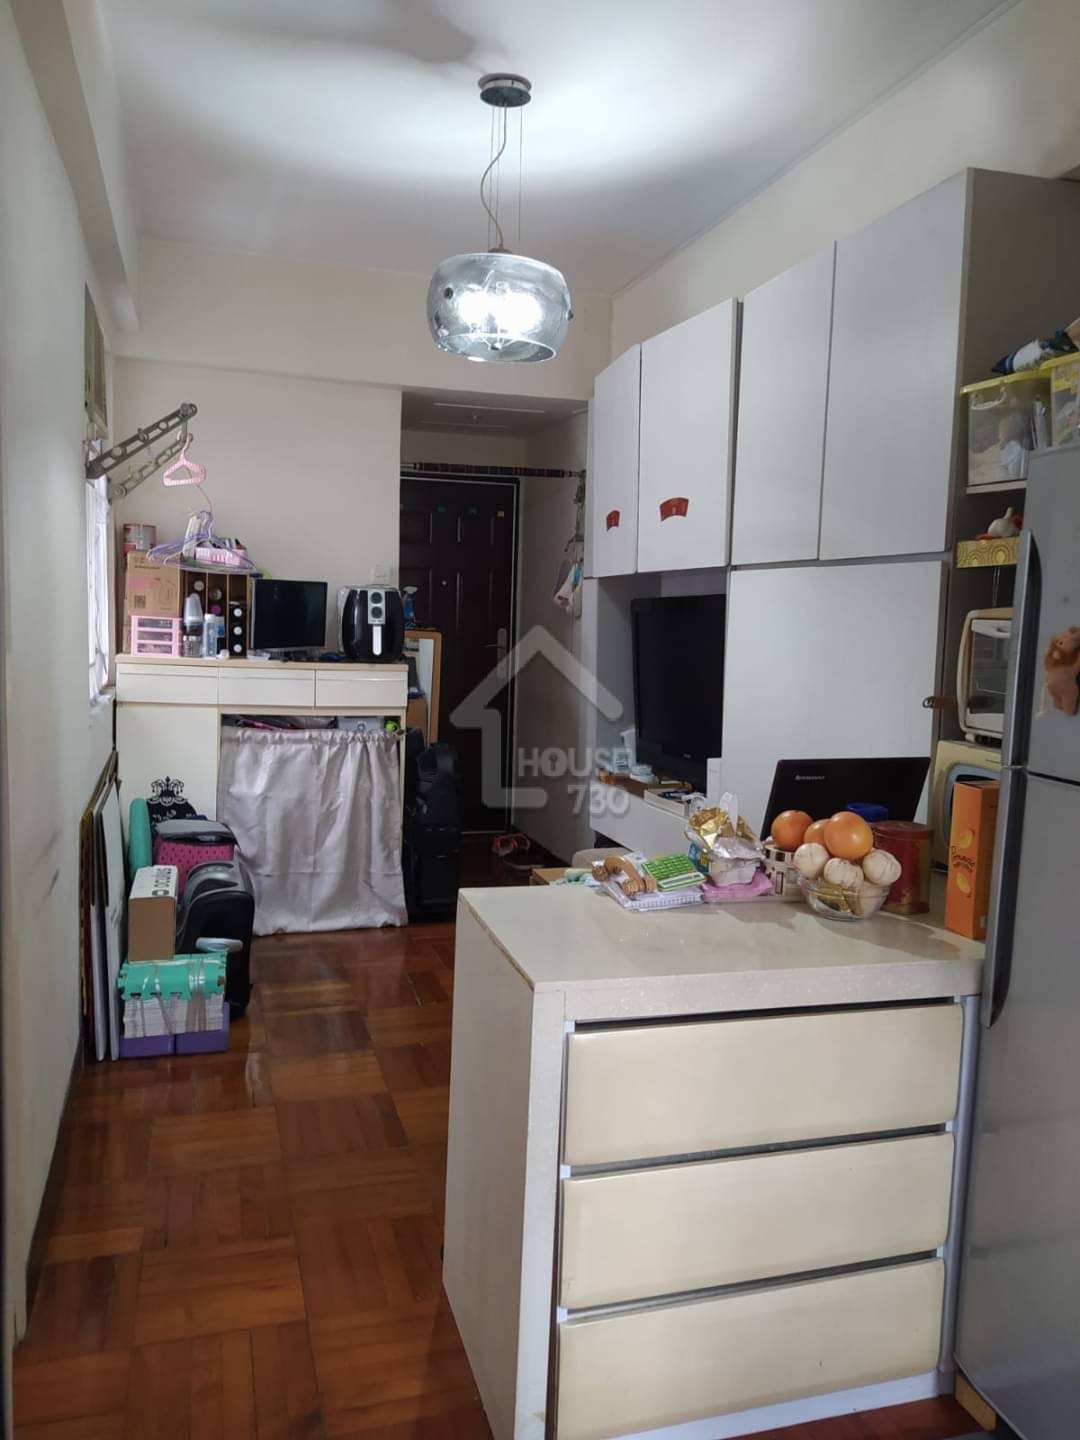 Yuen Long Town Centre HO KING BUILDING Middle Floor Living Room 客廳 House730-6865054